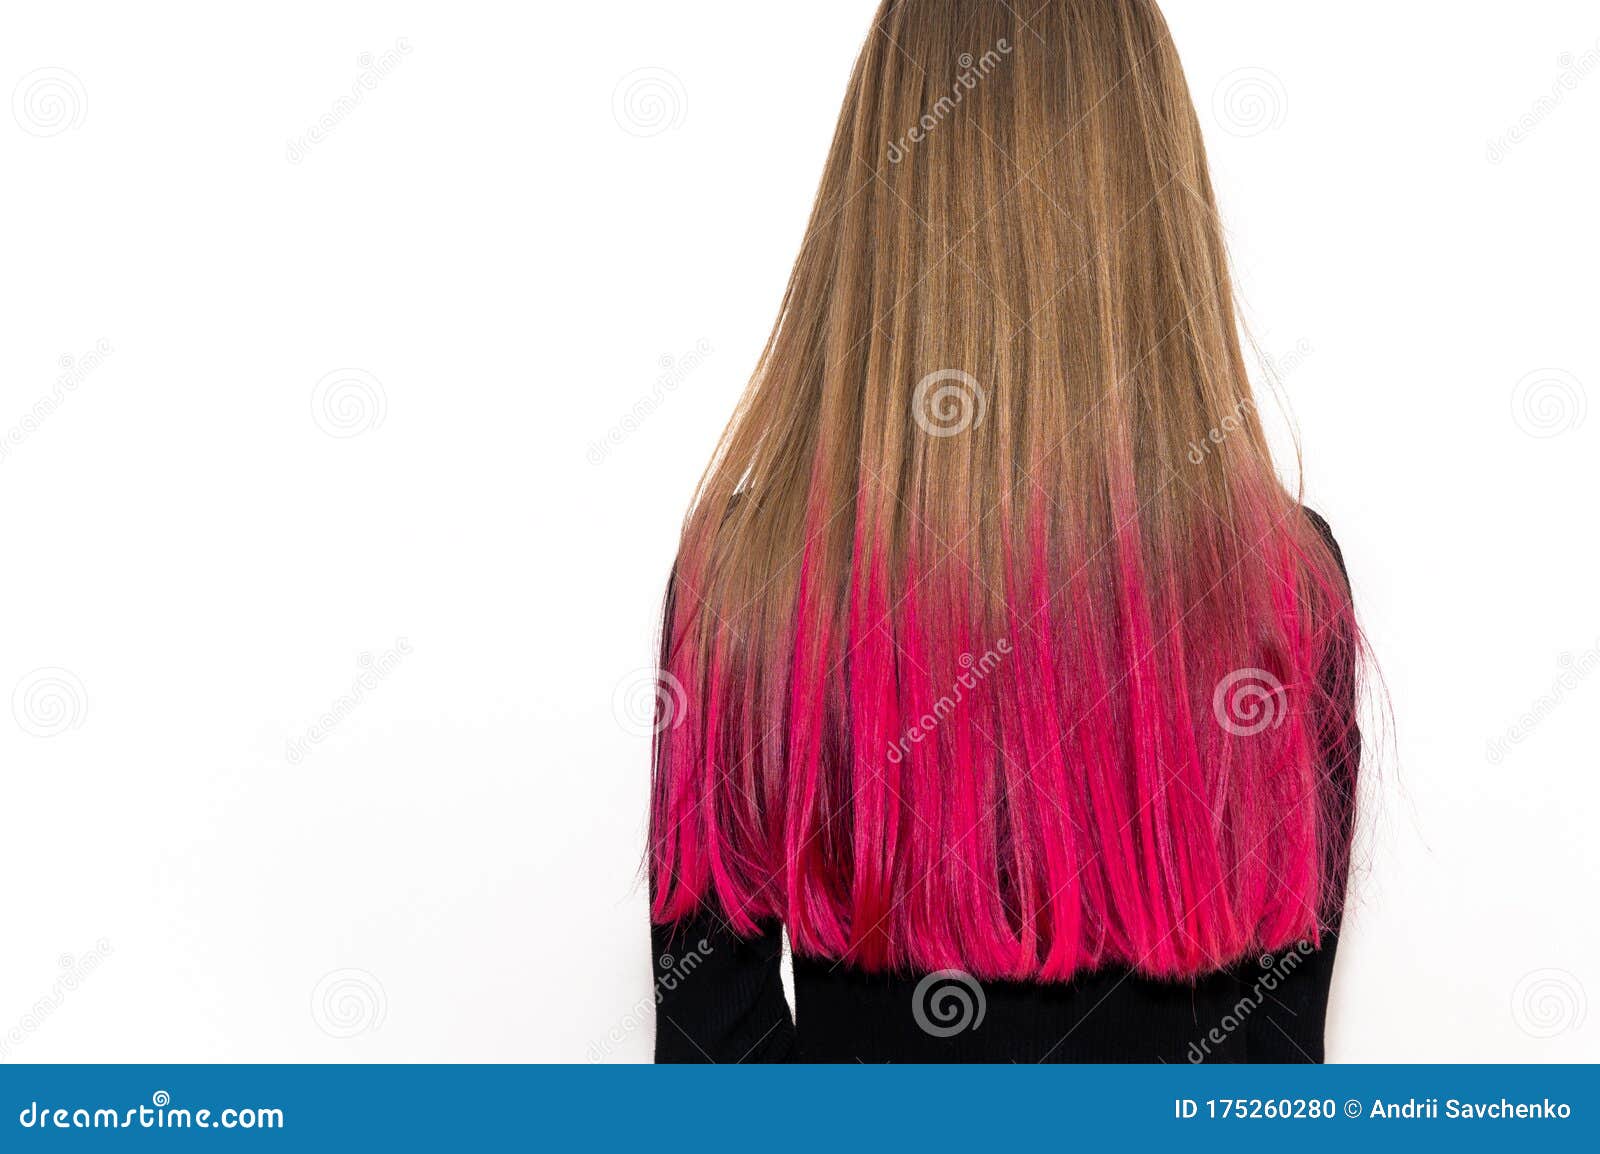 Girl with Pink Hair Half Dyed. Colored Hair Style Woman Stock Photo - Image  of expression, color: 175260280